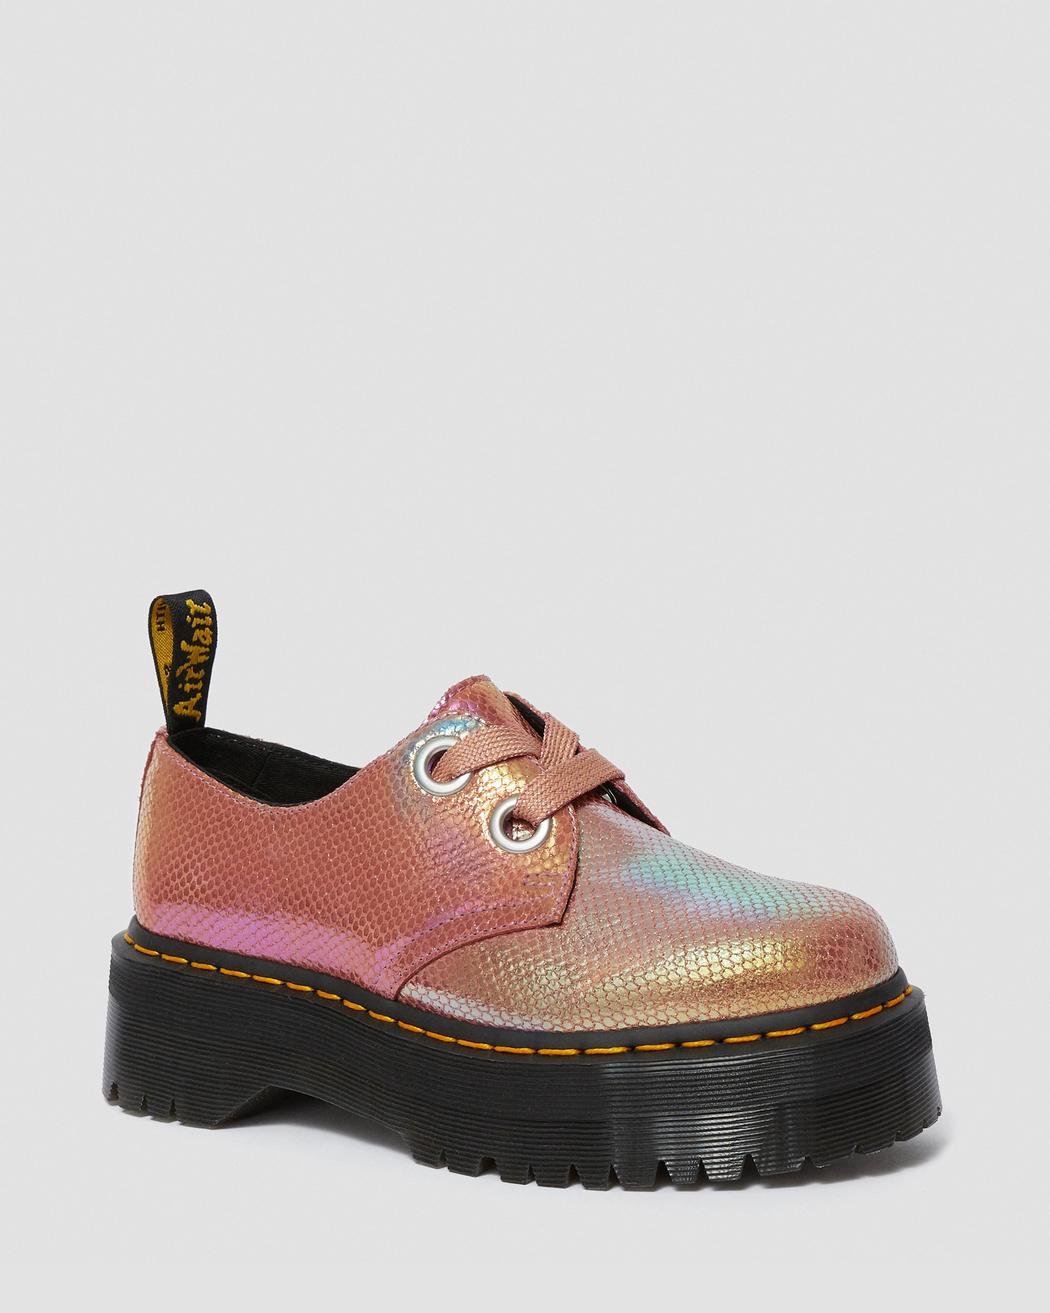 Holly Women's Iridescent Leather Platform Shoes | Dr. Martens